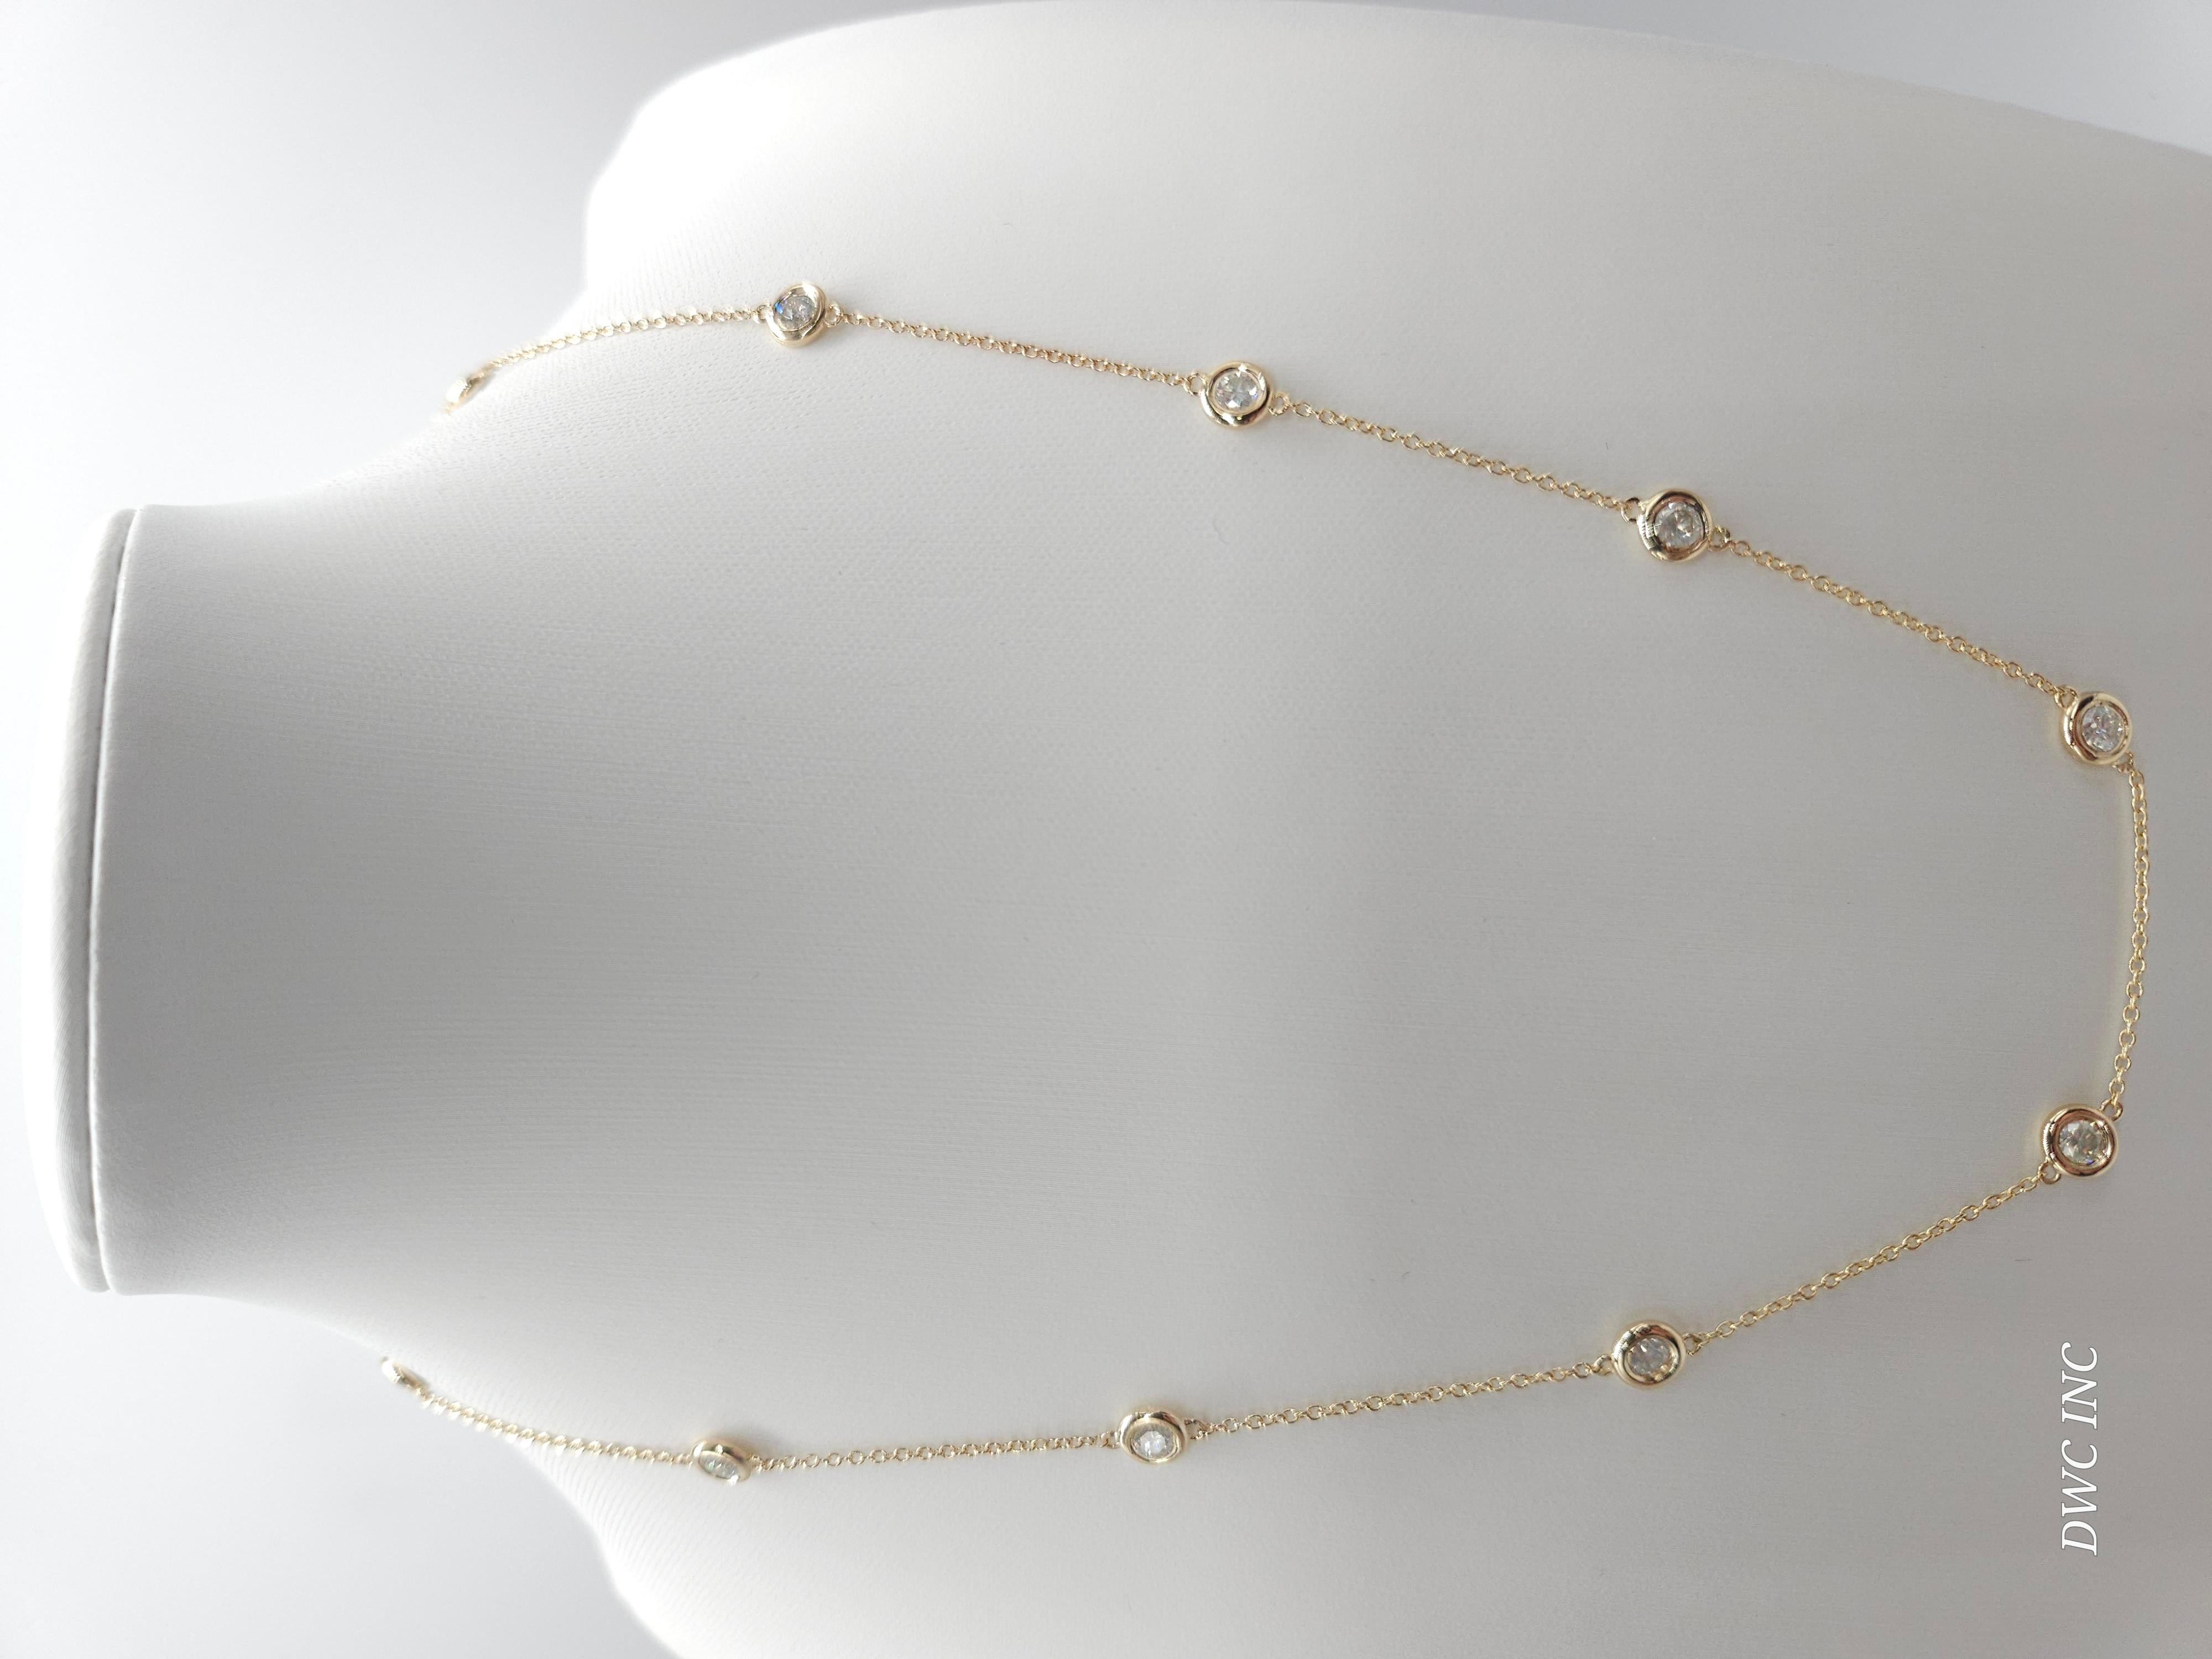 10 Station Diamond by the yard necklace set in Italian made 14K yellow gold. 
Total weight is 1.47 carats. Beautiful shiny stones. 
Length 17 inch 4.59 grams. Average H,VS Natural Diamond

*Free shipping within U.S*